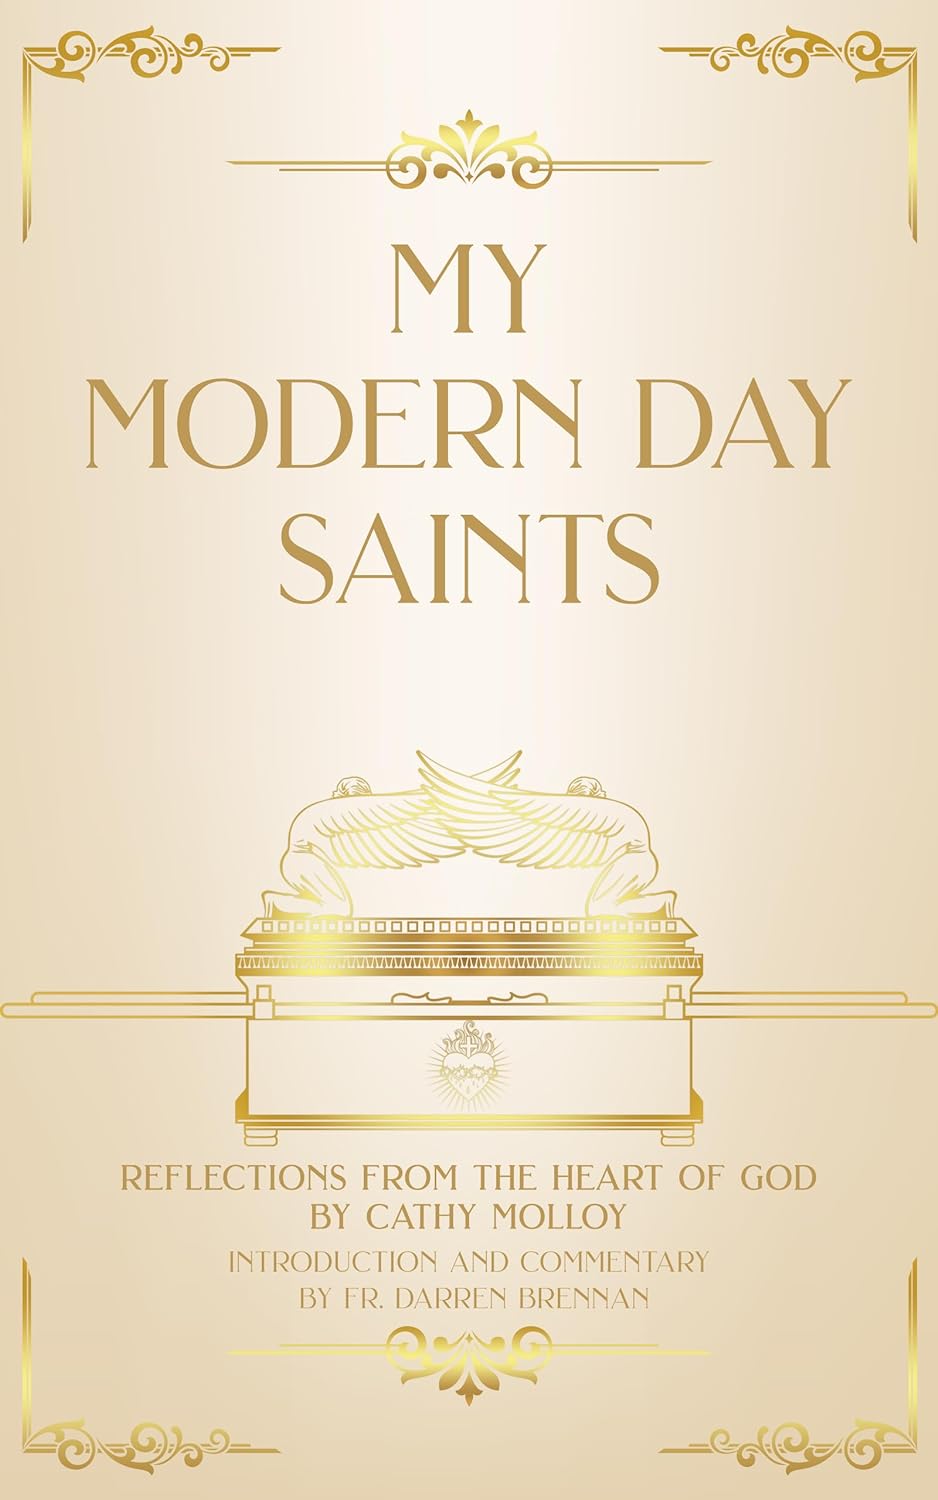 New anthology "My Modern Day Saints" by Cathy Molloy and Fr. Darren Brennan has been released, a collection of inspired writings on the mysteries of the Catholic faith